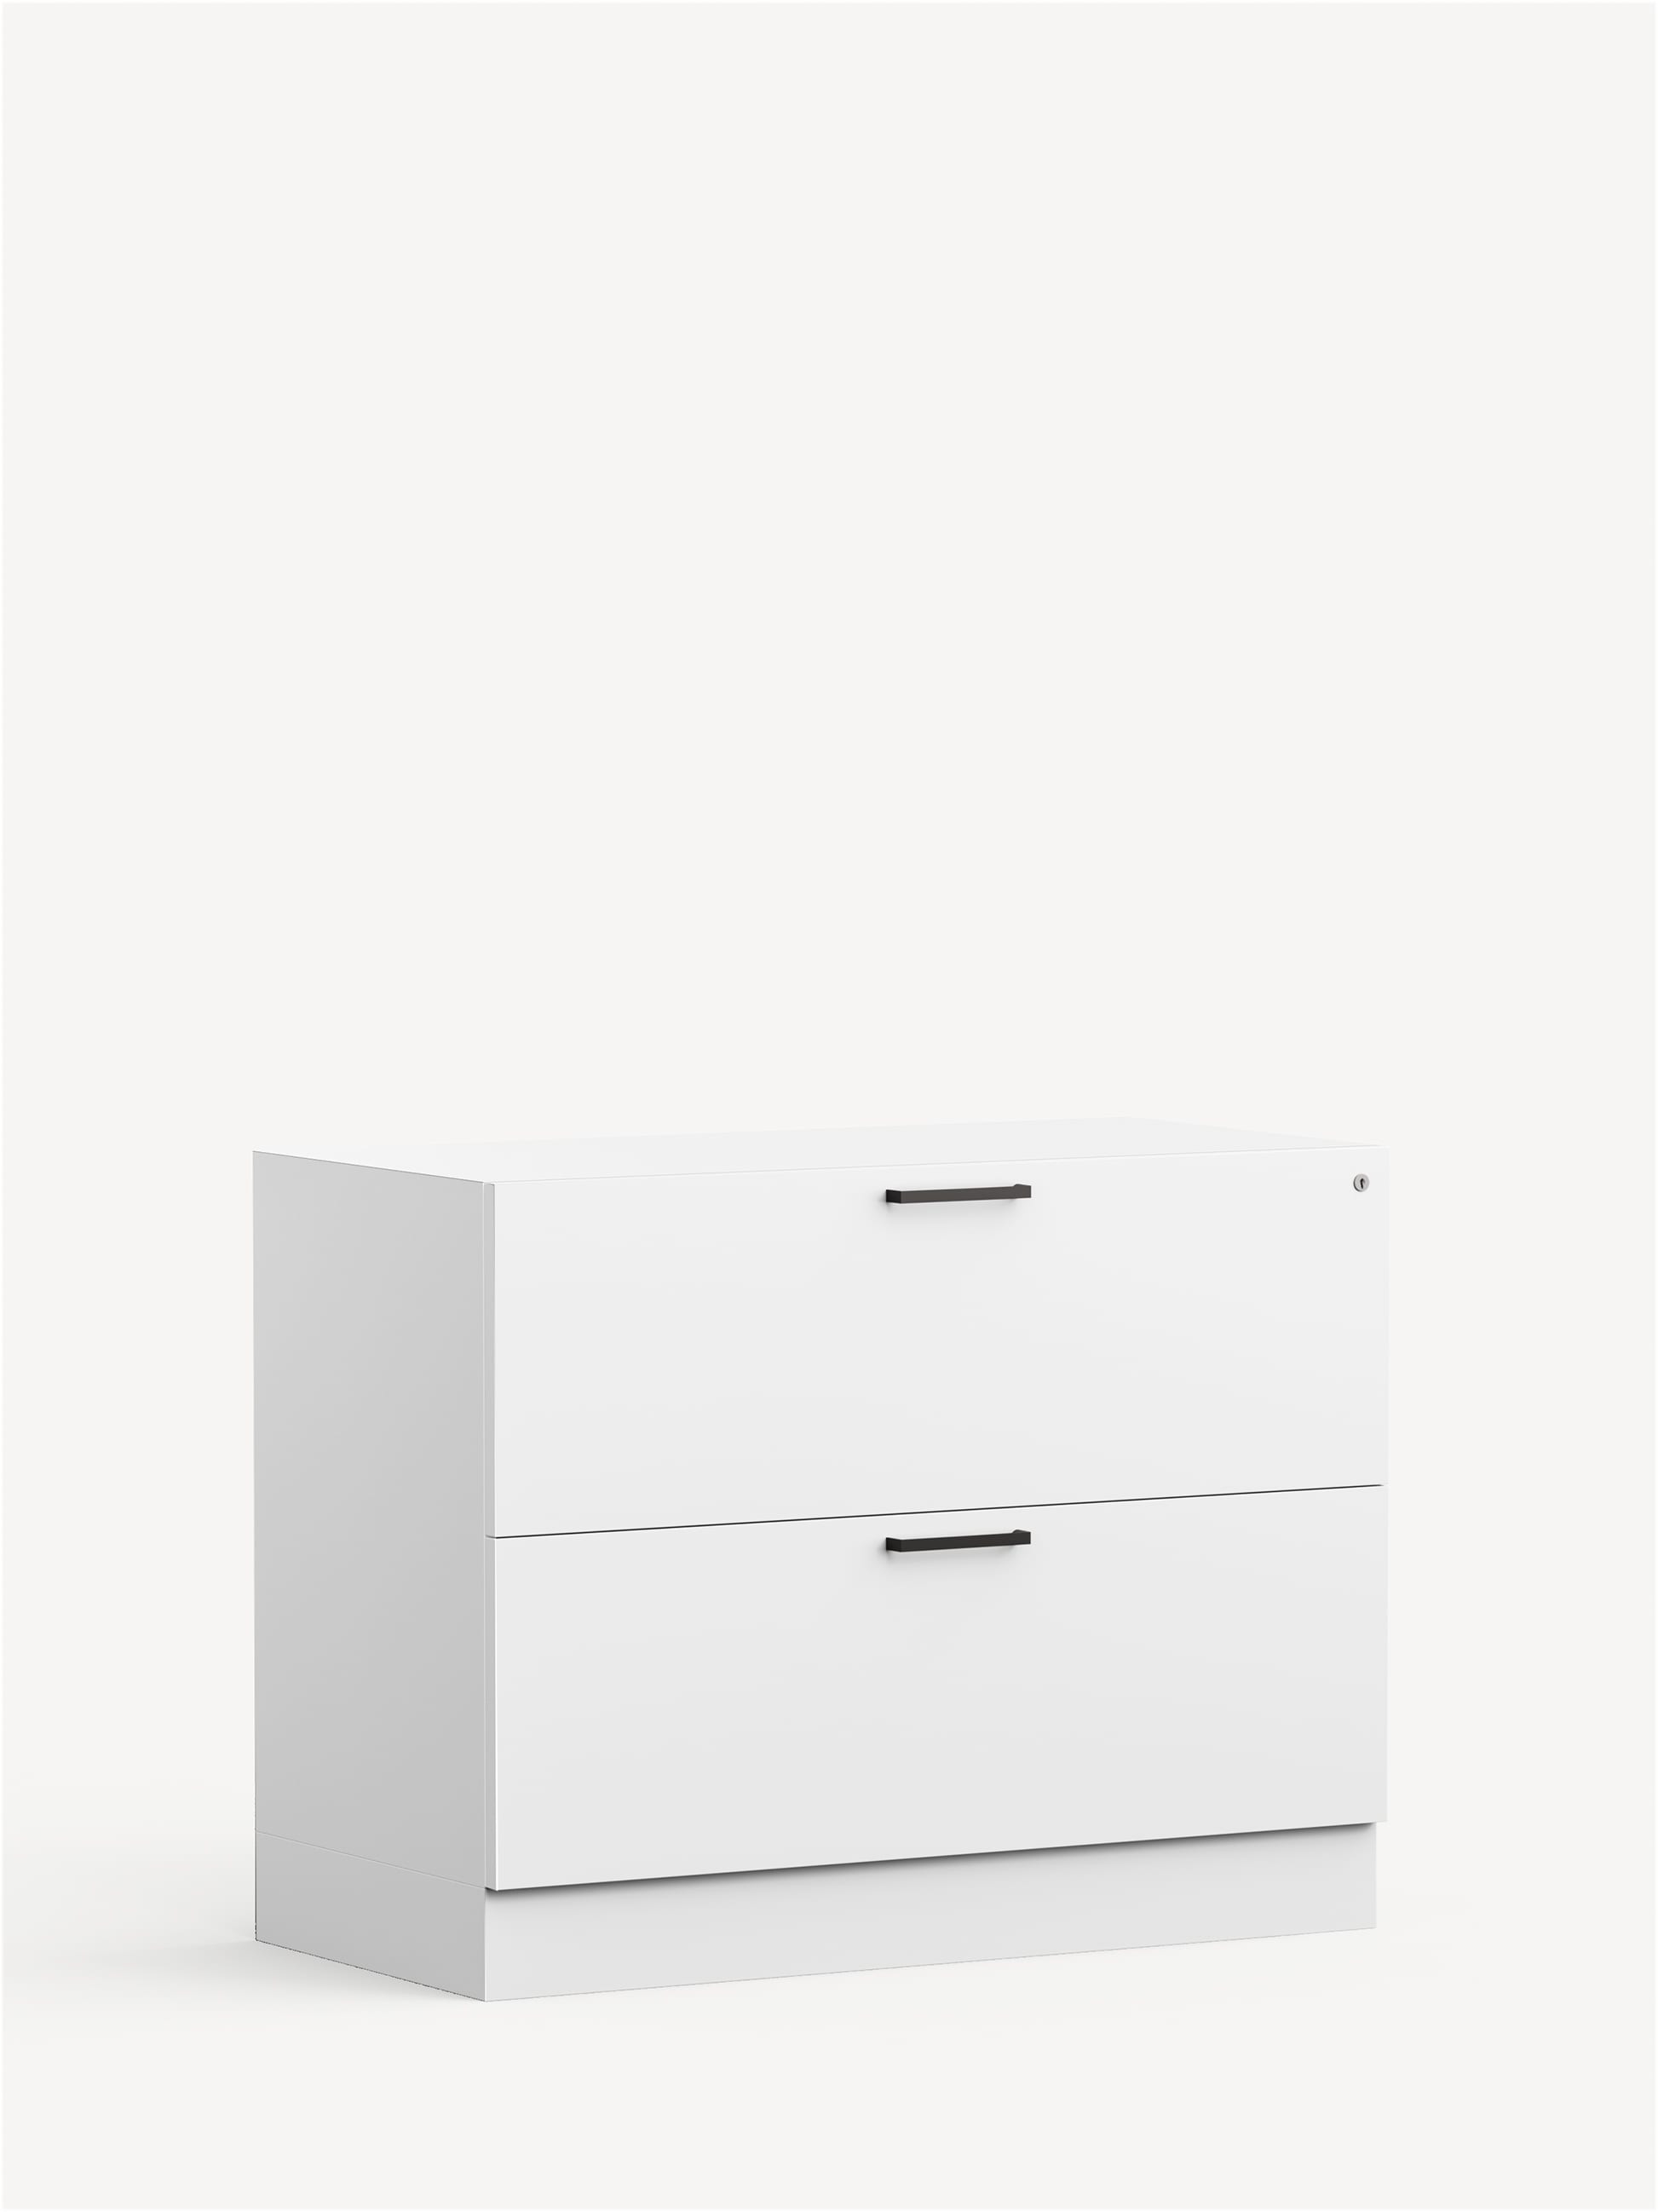 Align Lateral File in white with a recessed plinth base and two file drawers.